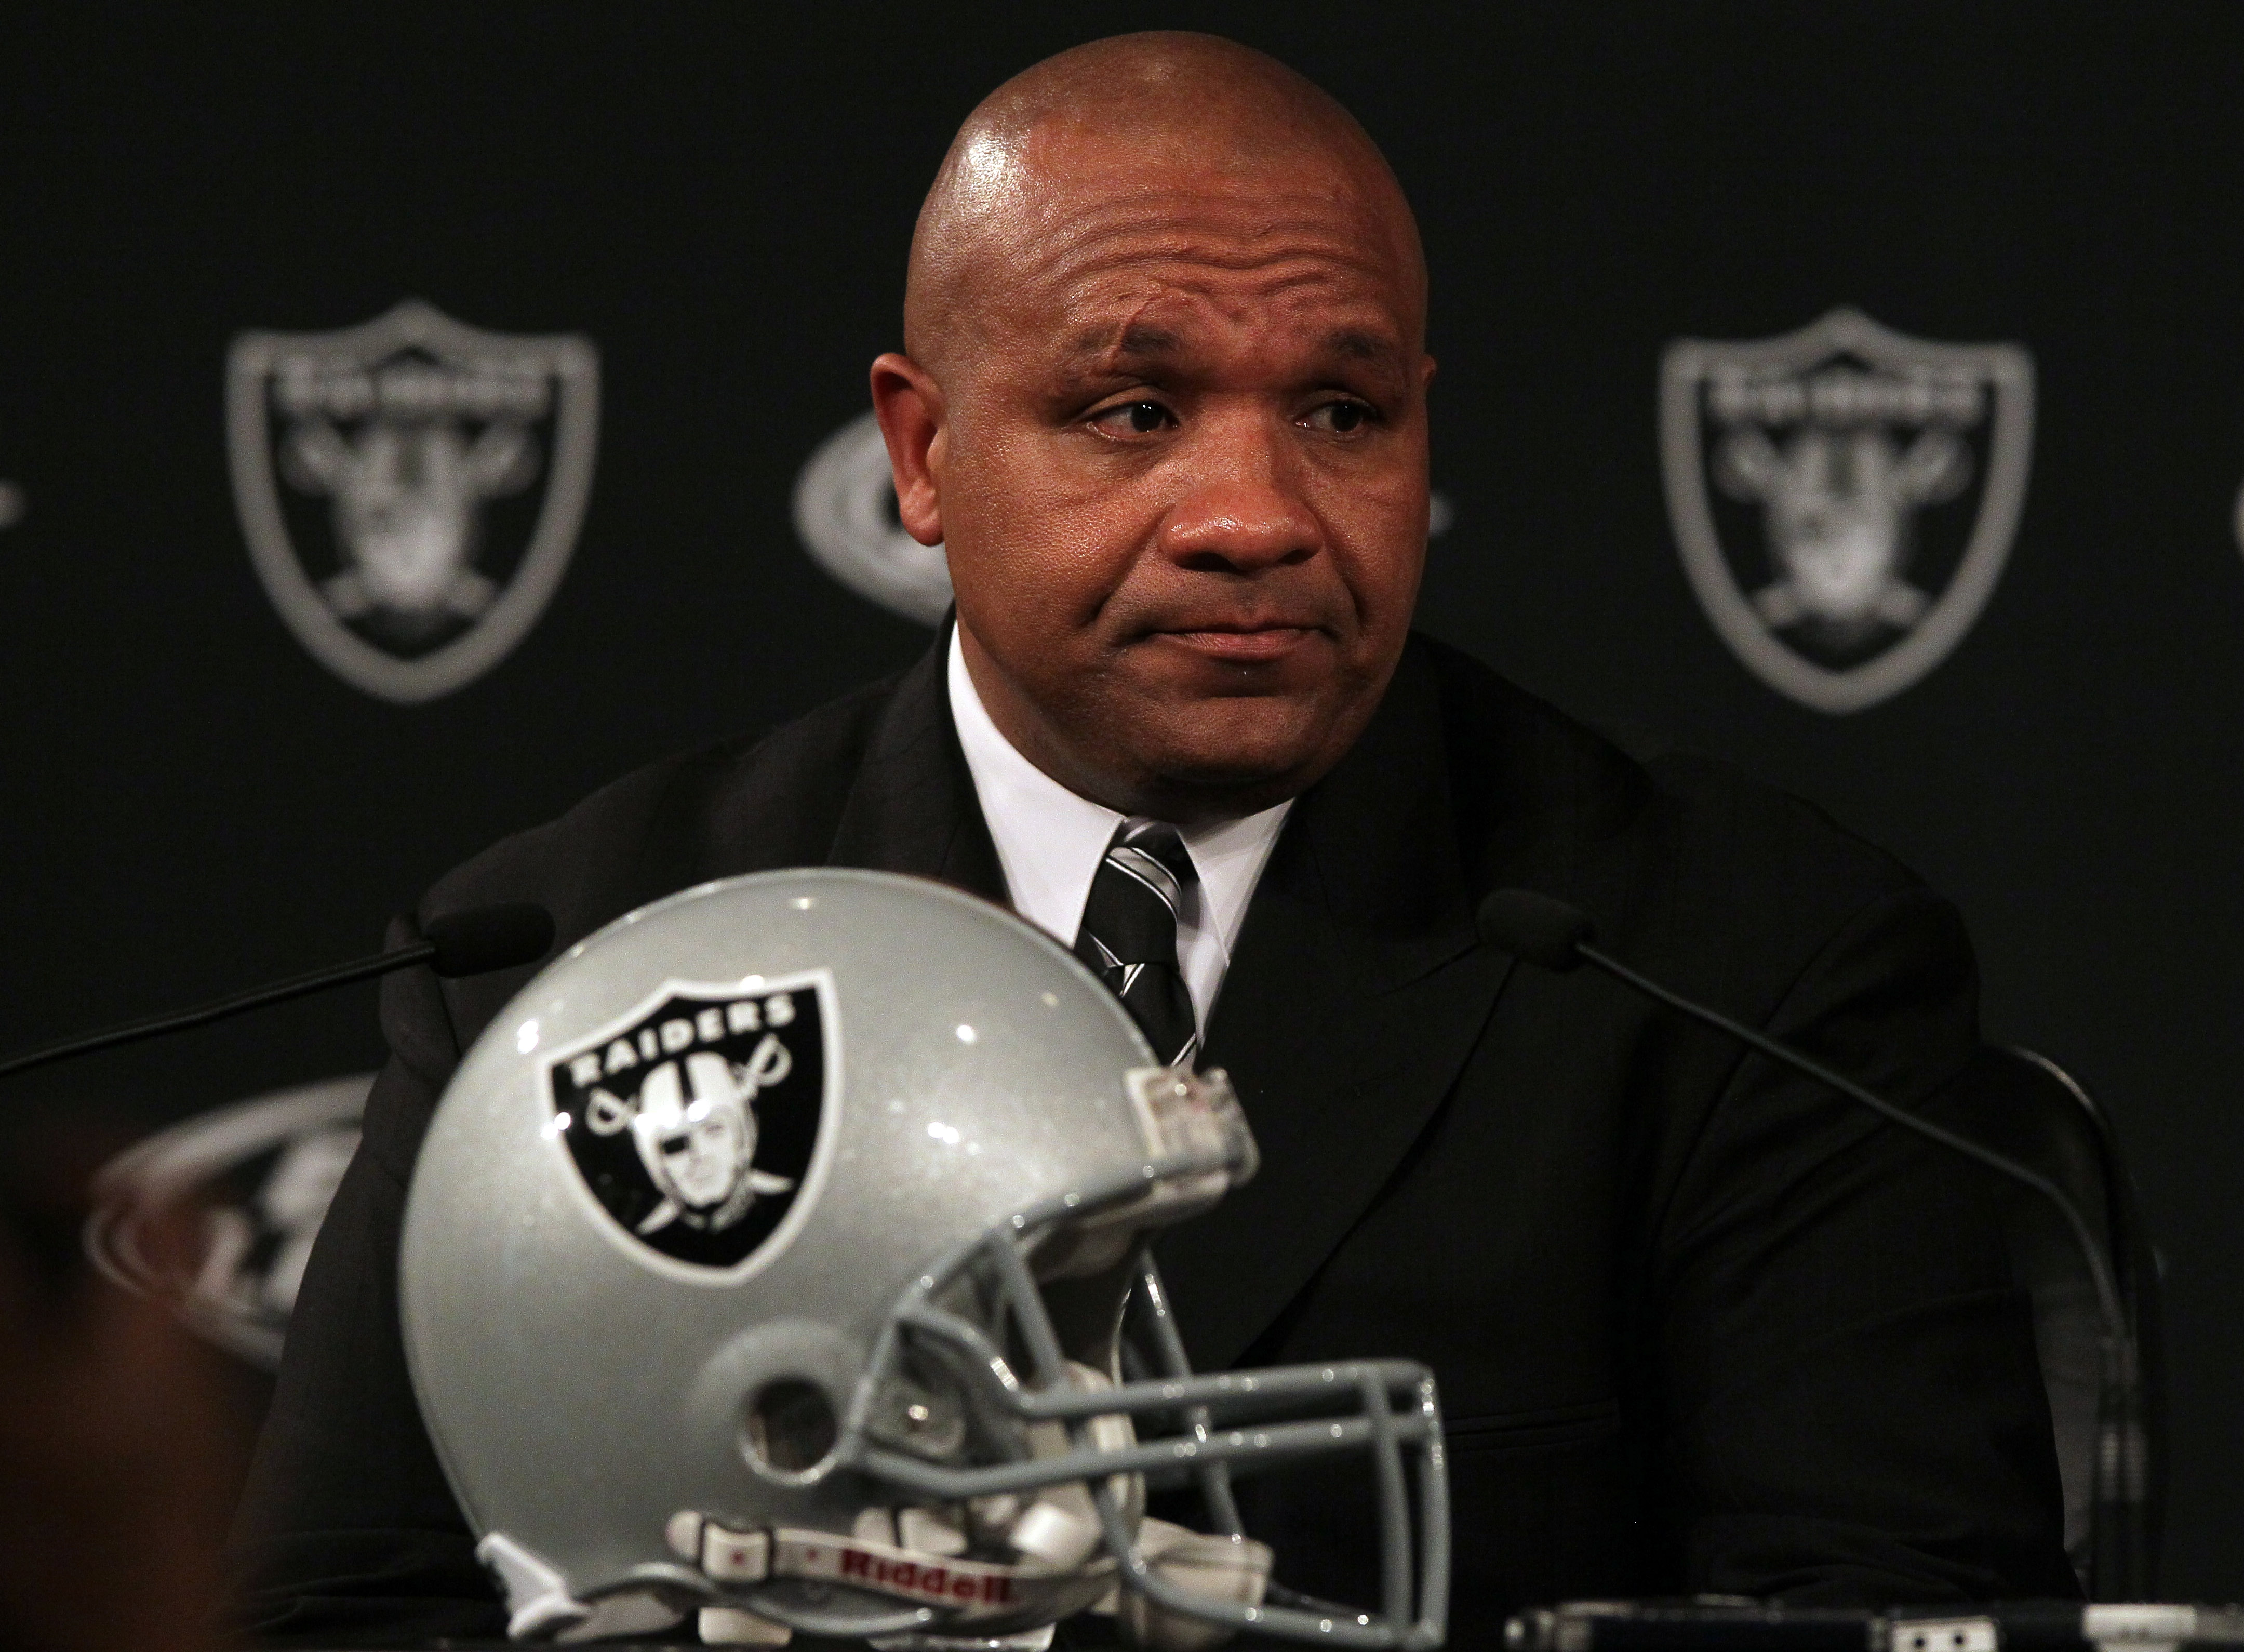 ALAMEDA, CA - JANUARY 18:  New Oakland Raiders coach Hue Jackson pauses as he speaks to reporters during a press conference on January 18, 2011 in Alameda, California. Hue Jackson was introduced as the new coach of the Oakland Raiders, replacing the fired